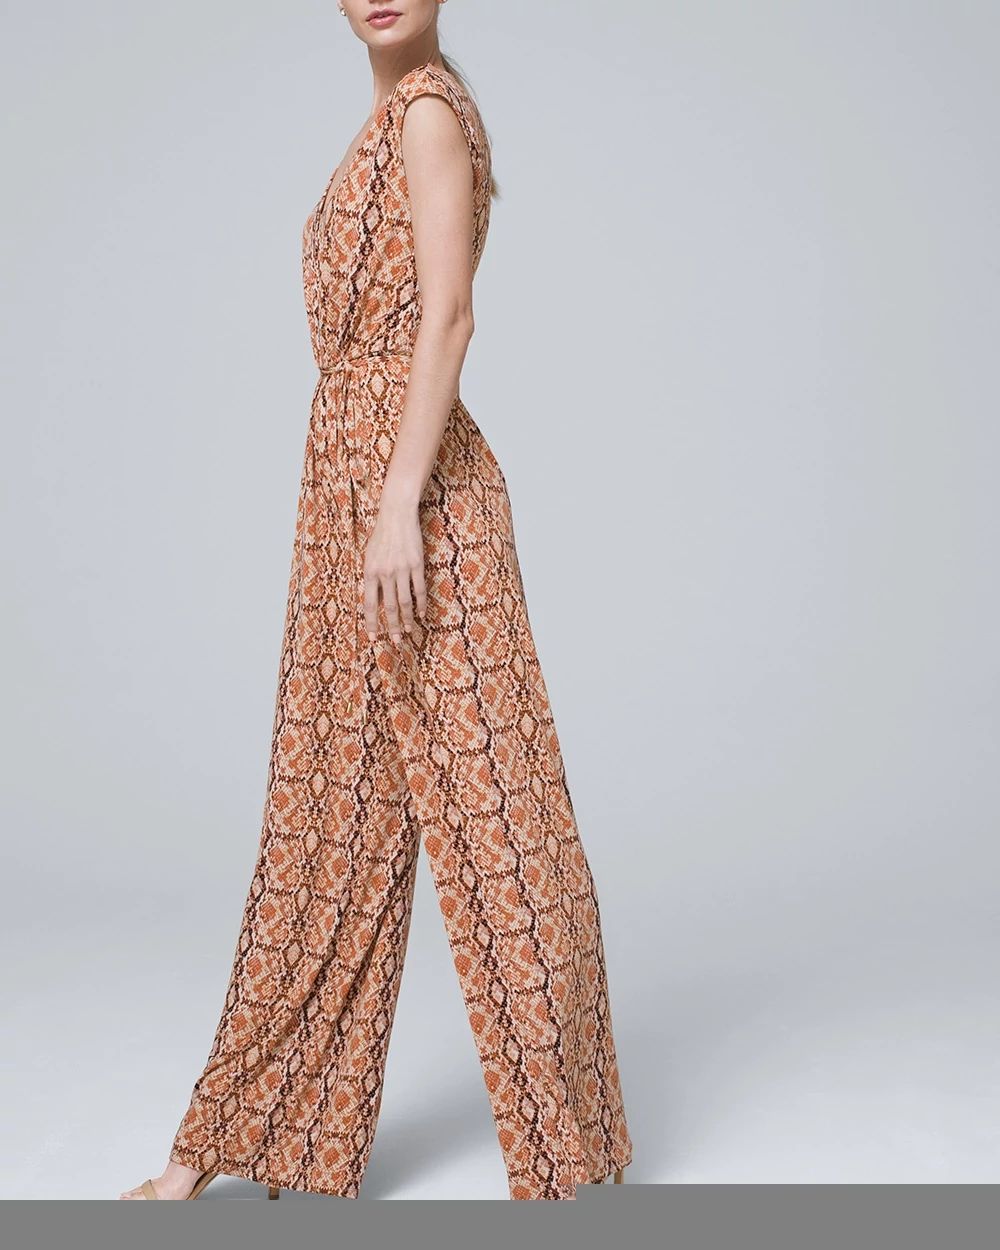 Printed Jersey Knit Jumpsuit click to view larger image.